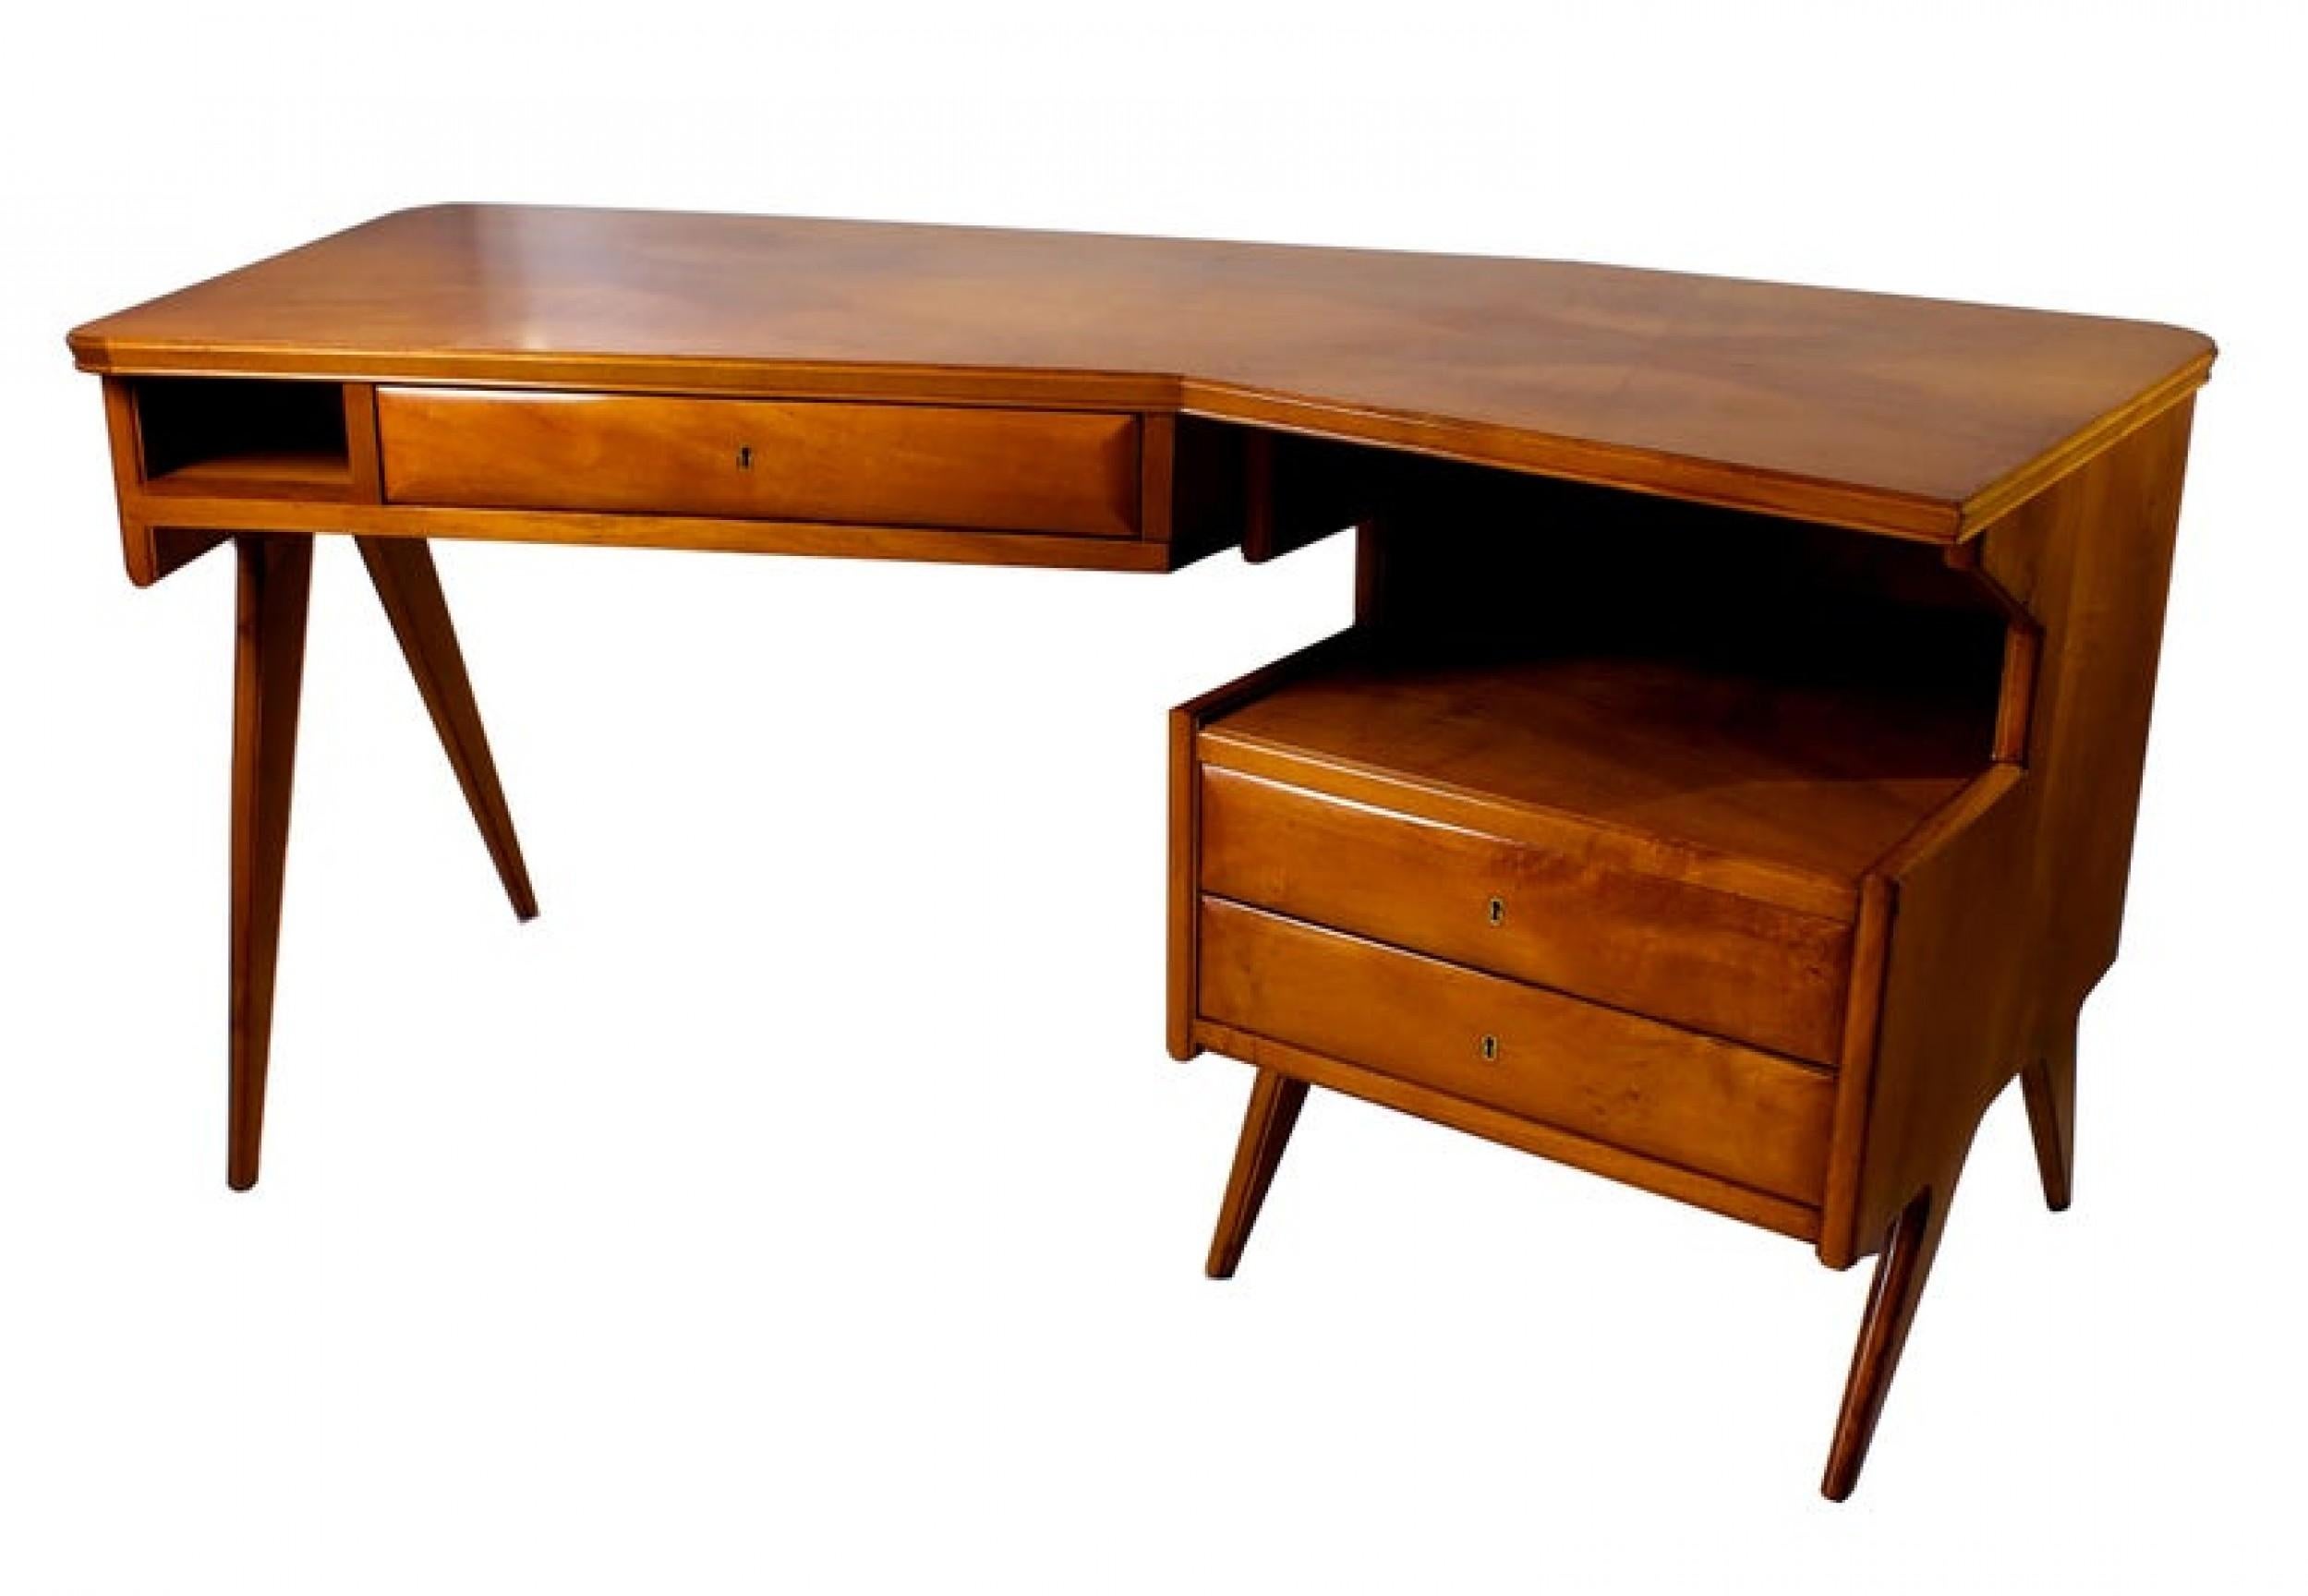 Italian Modern Walnut and Rootwood Desk, Attributed to Gio Ponti In Good Condition For Sale In New York, NY